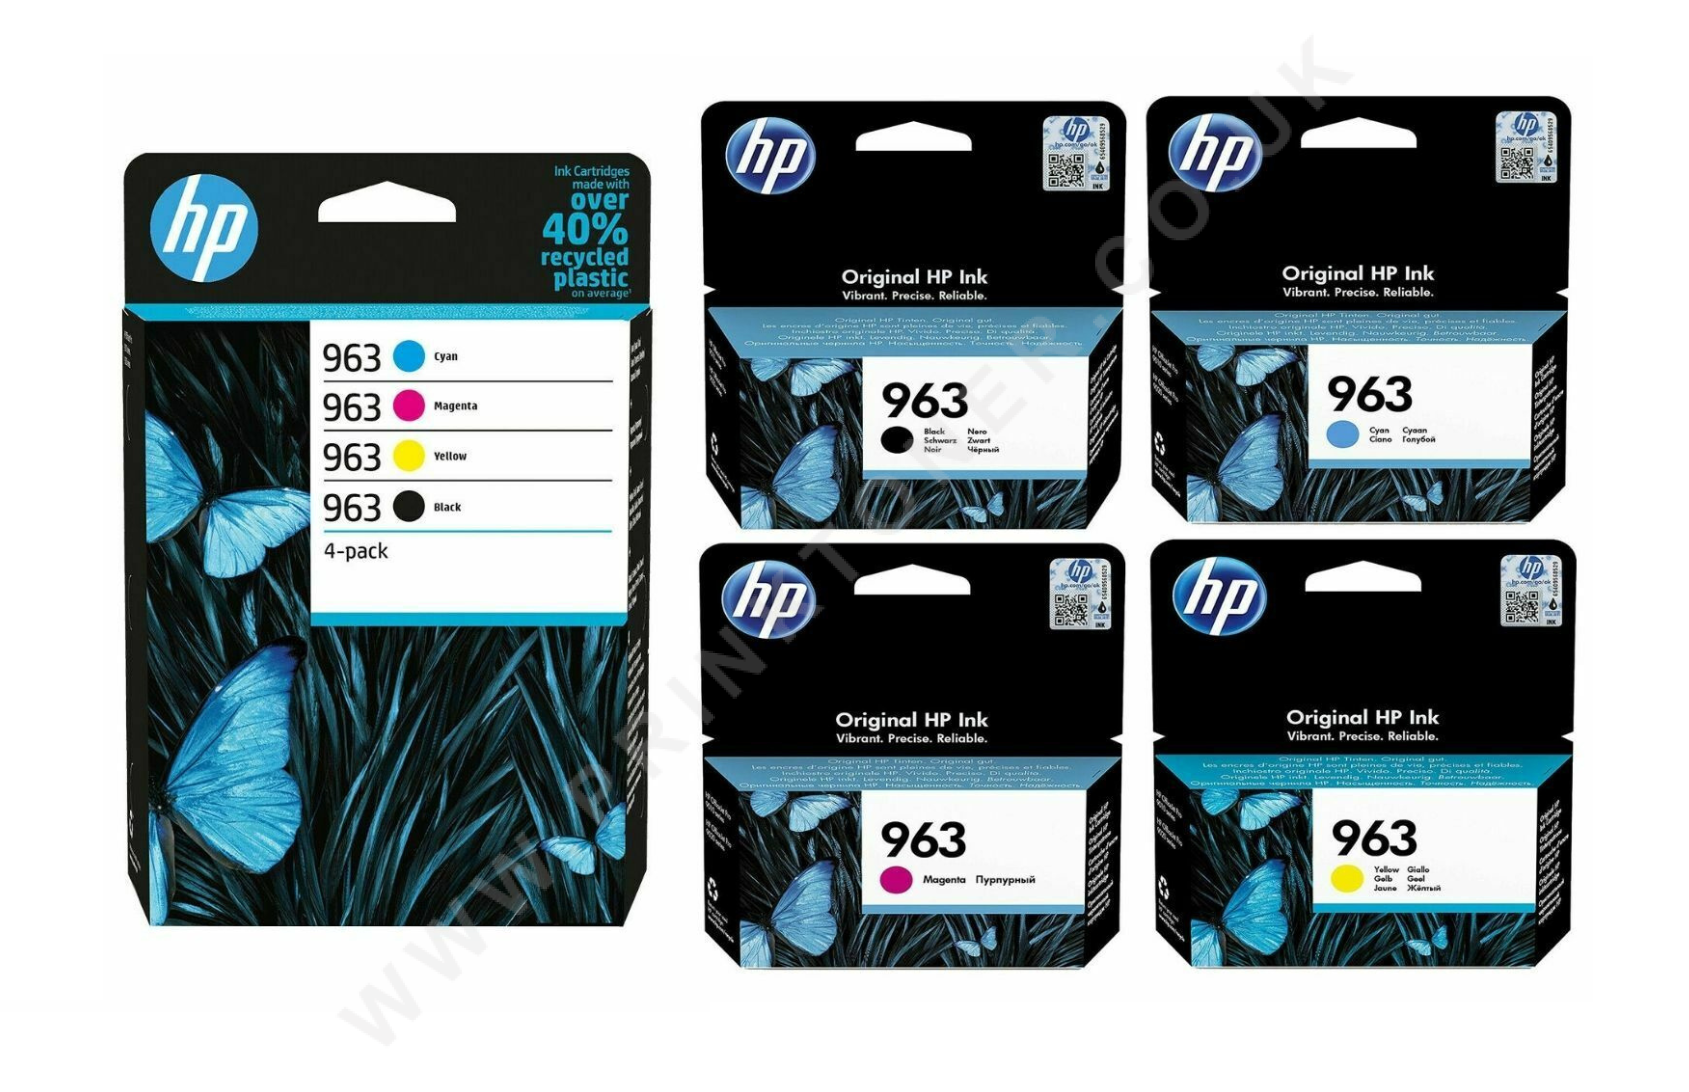 Whats the difference between HP 302 and HP 302XL ink cartridges? - Ink  Jungle